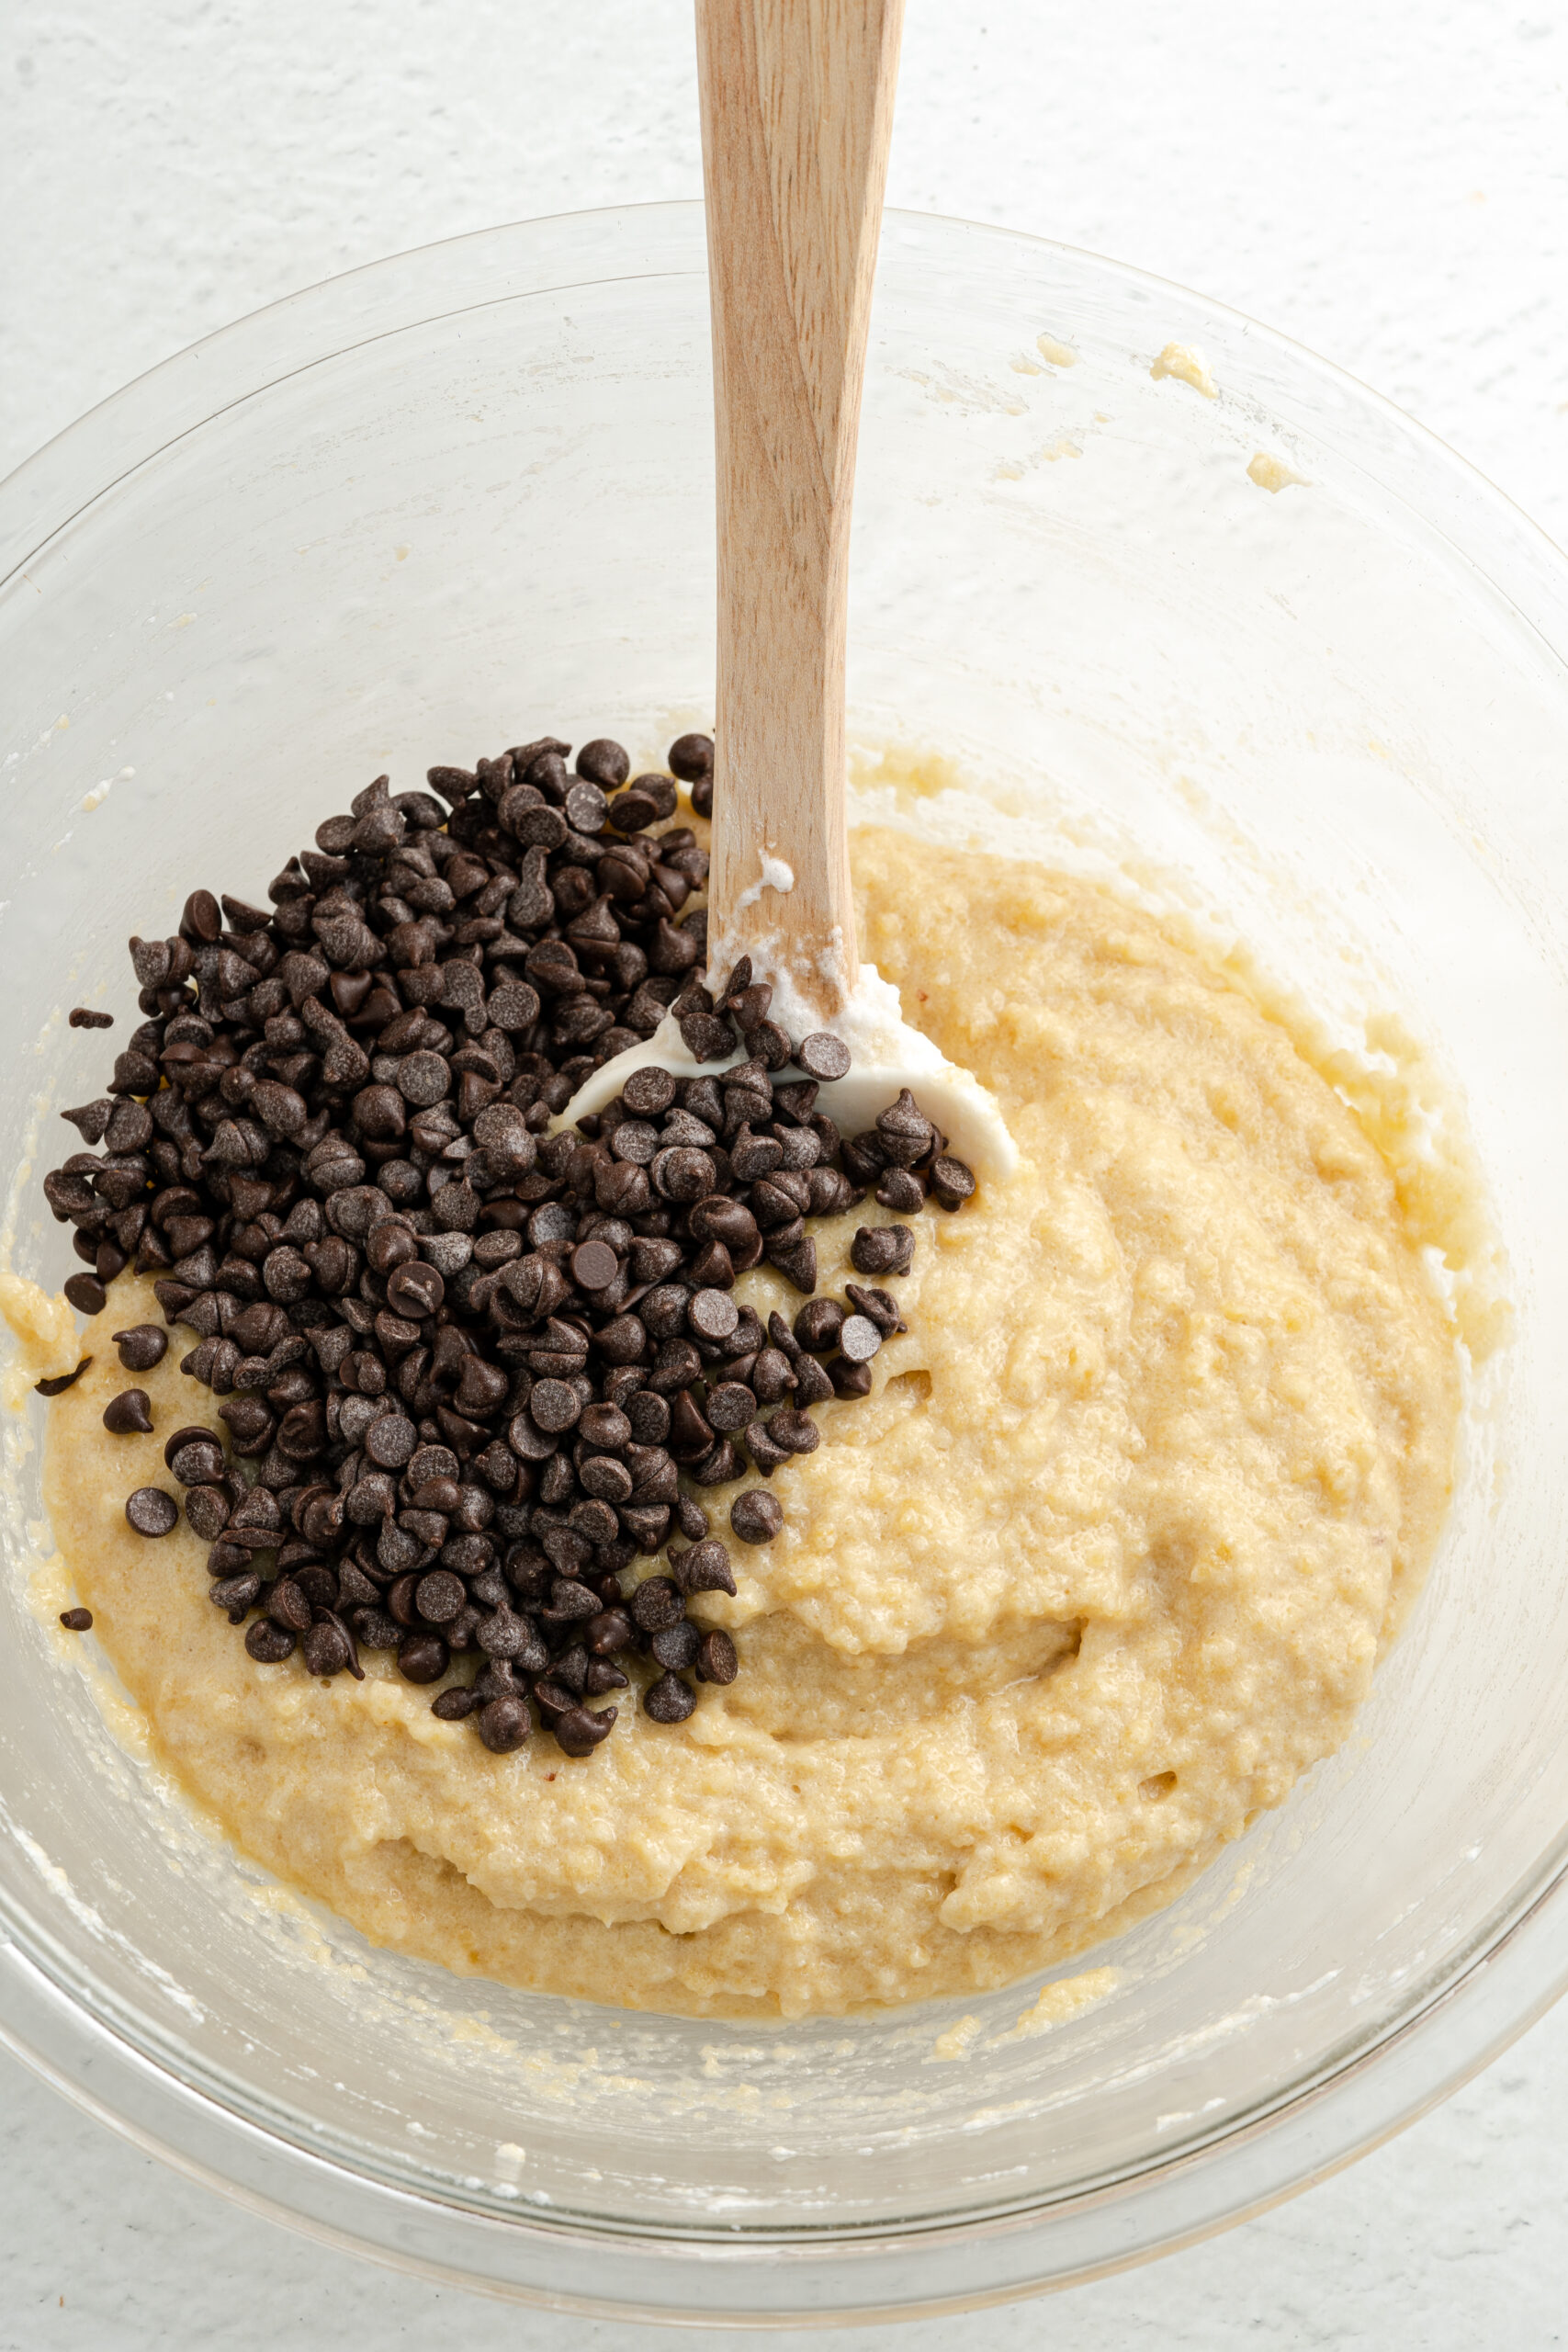 Batter for muffins with chocolate chips in mixing bowl.